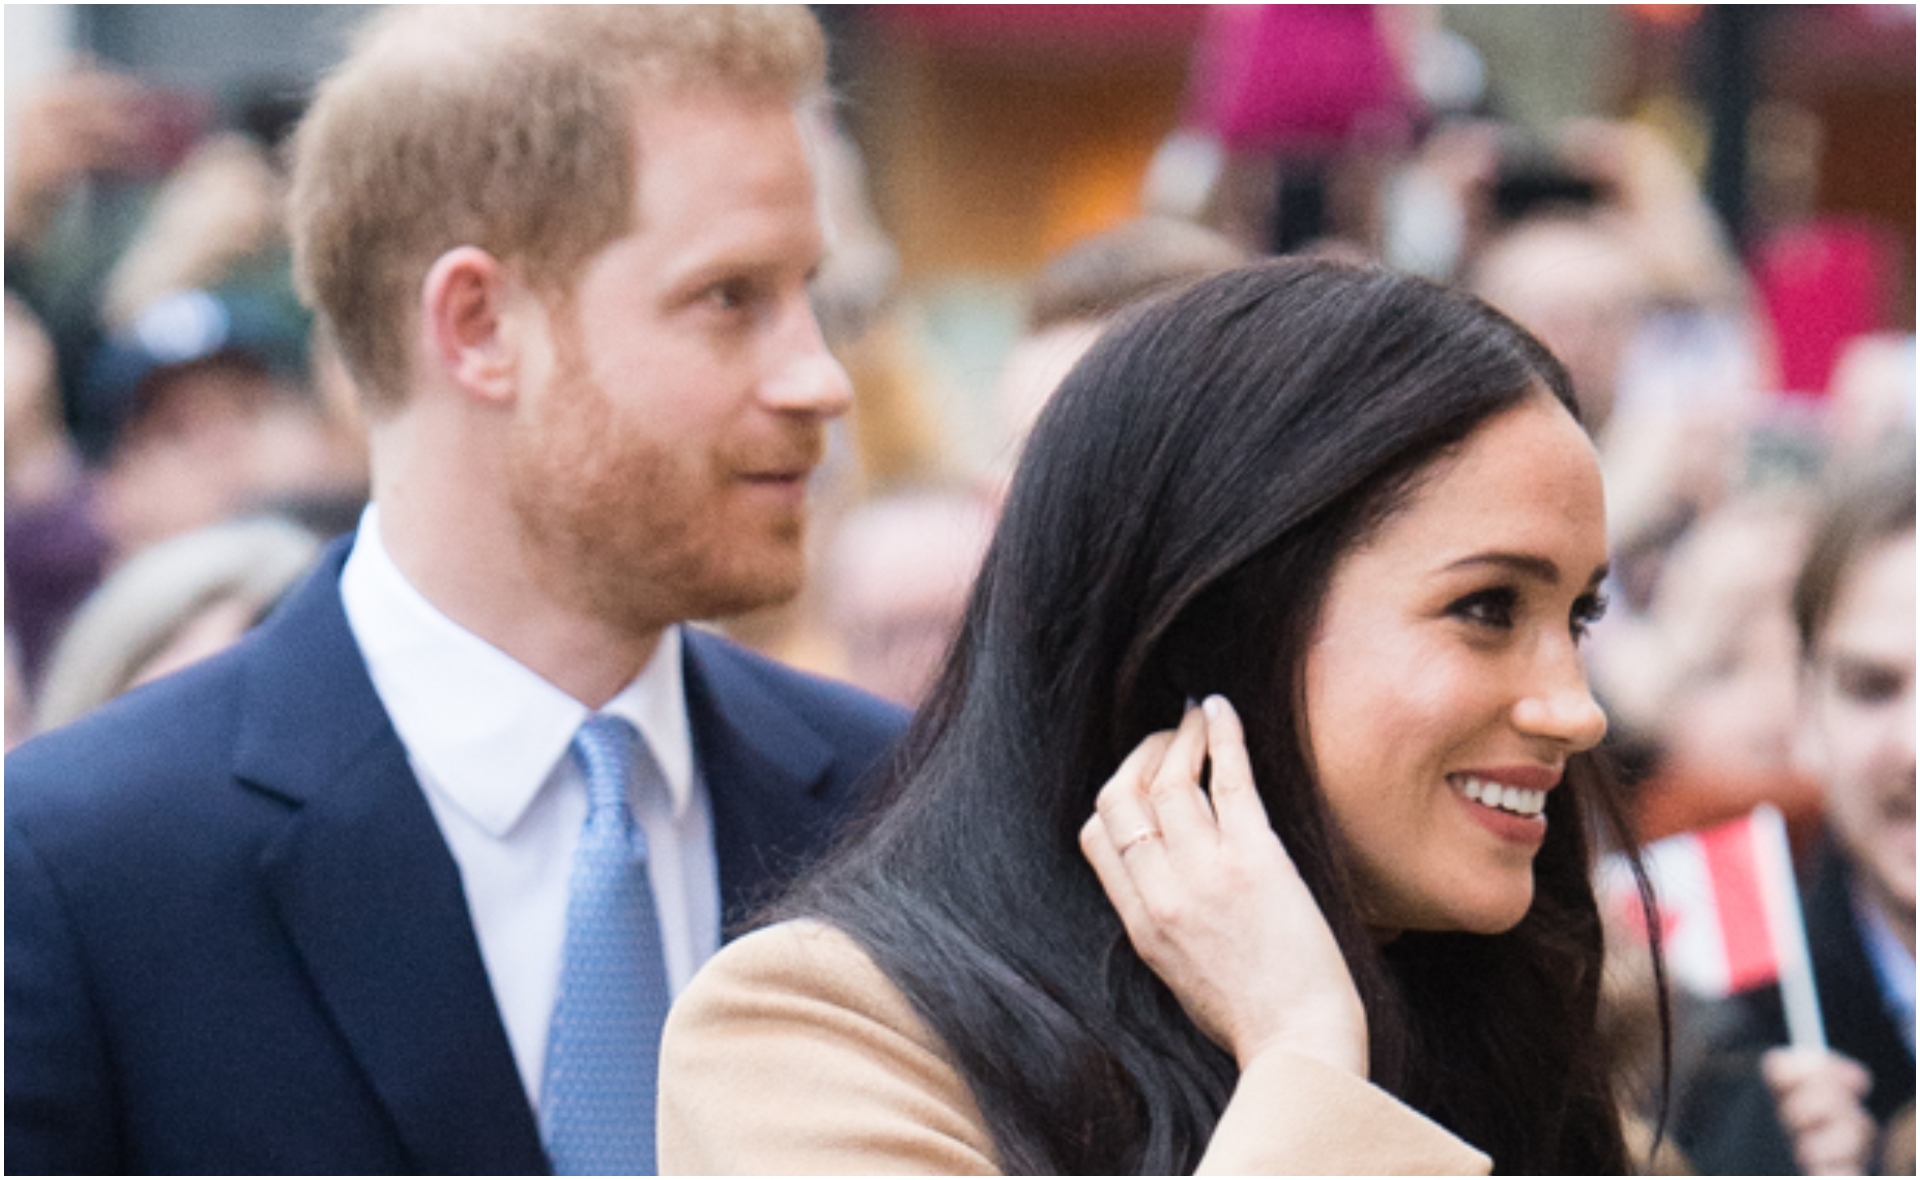 “They were overjoyed that it happened so quickly”: Harry and Meghan’s excitement revealed after second pregnancy